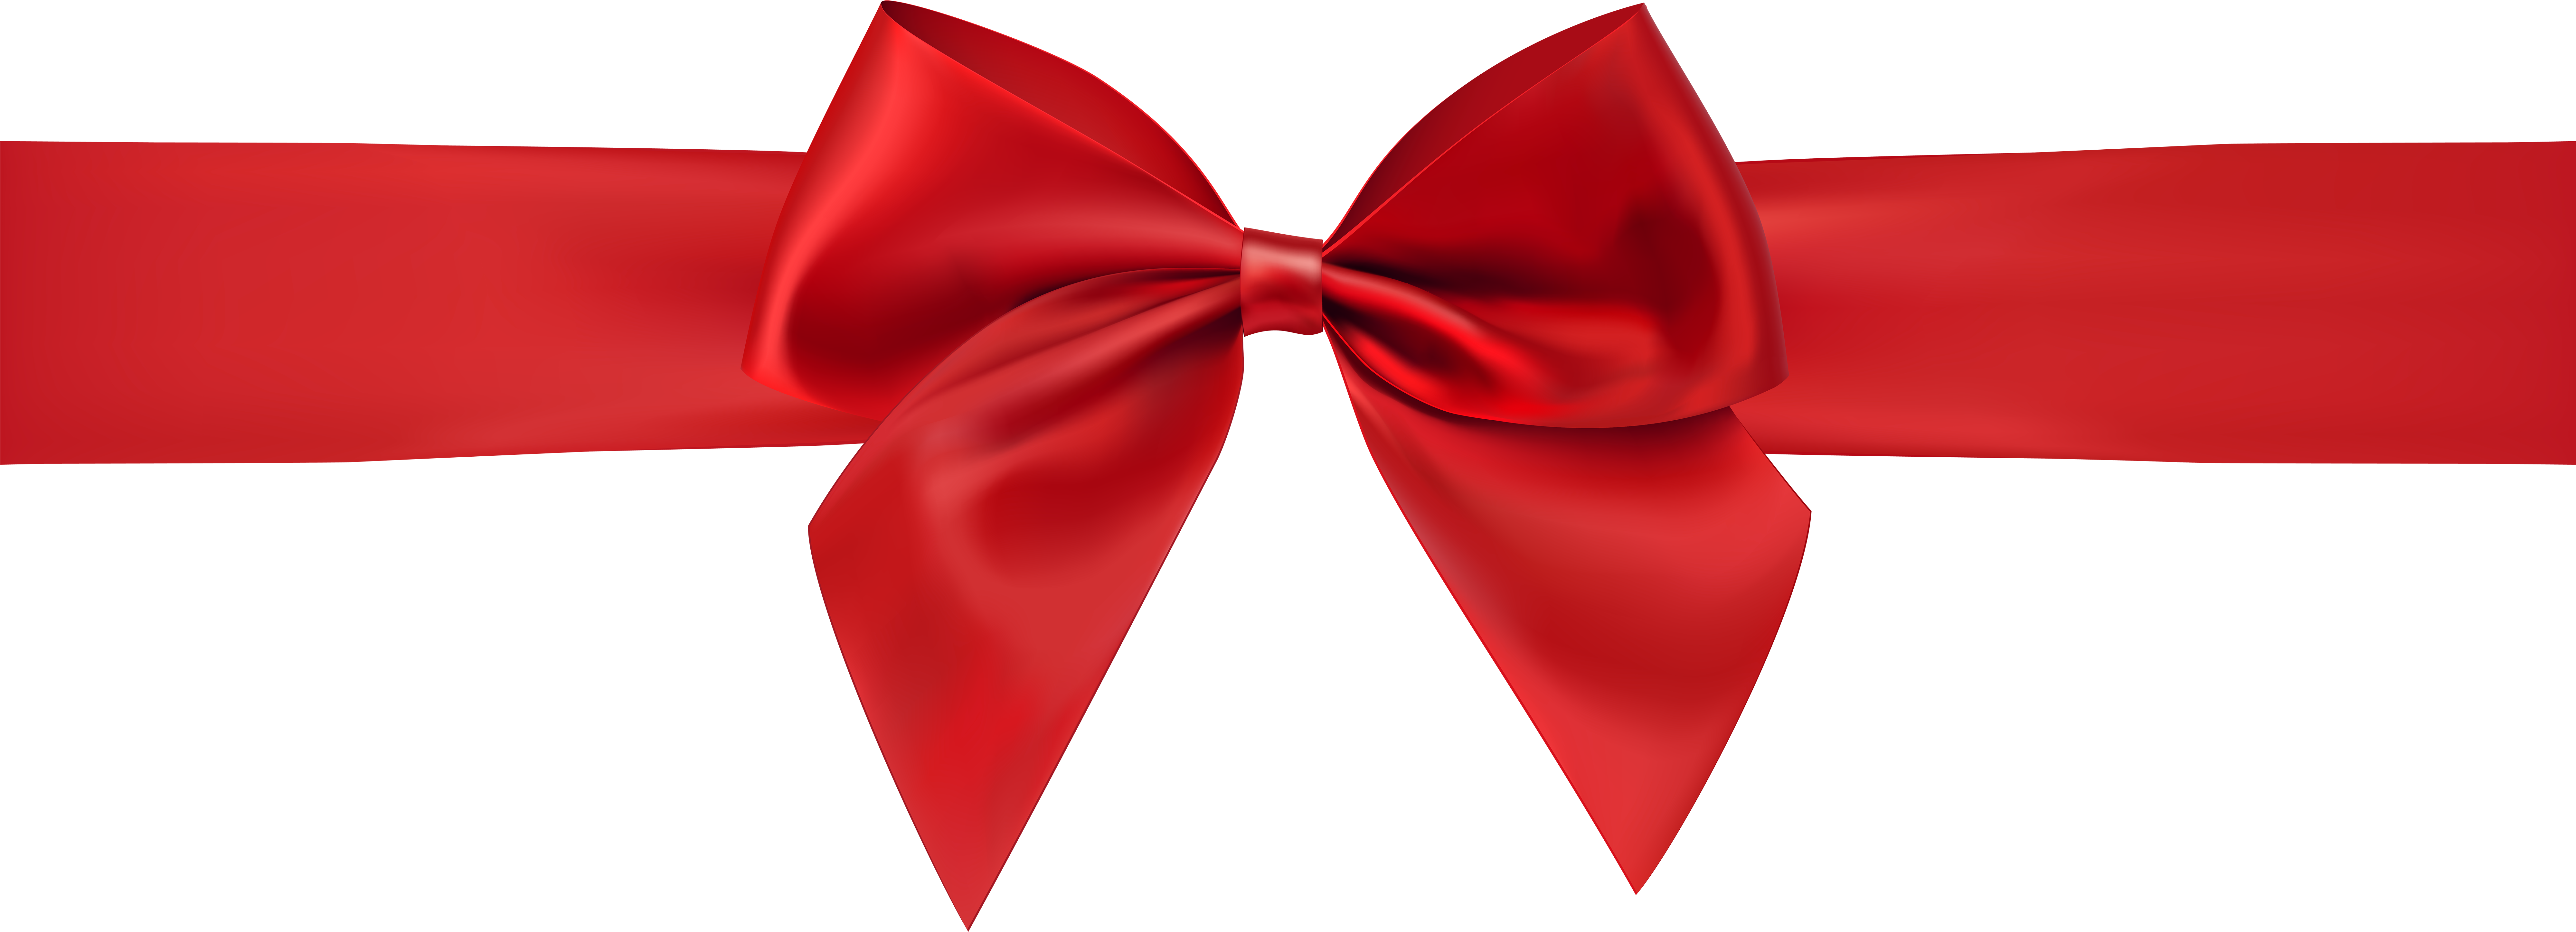 Red Ribbon Gift Ribbon Festive Gift Bow Transparent Background Png | My ...